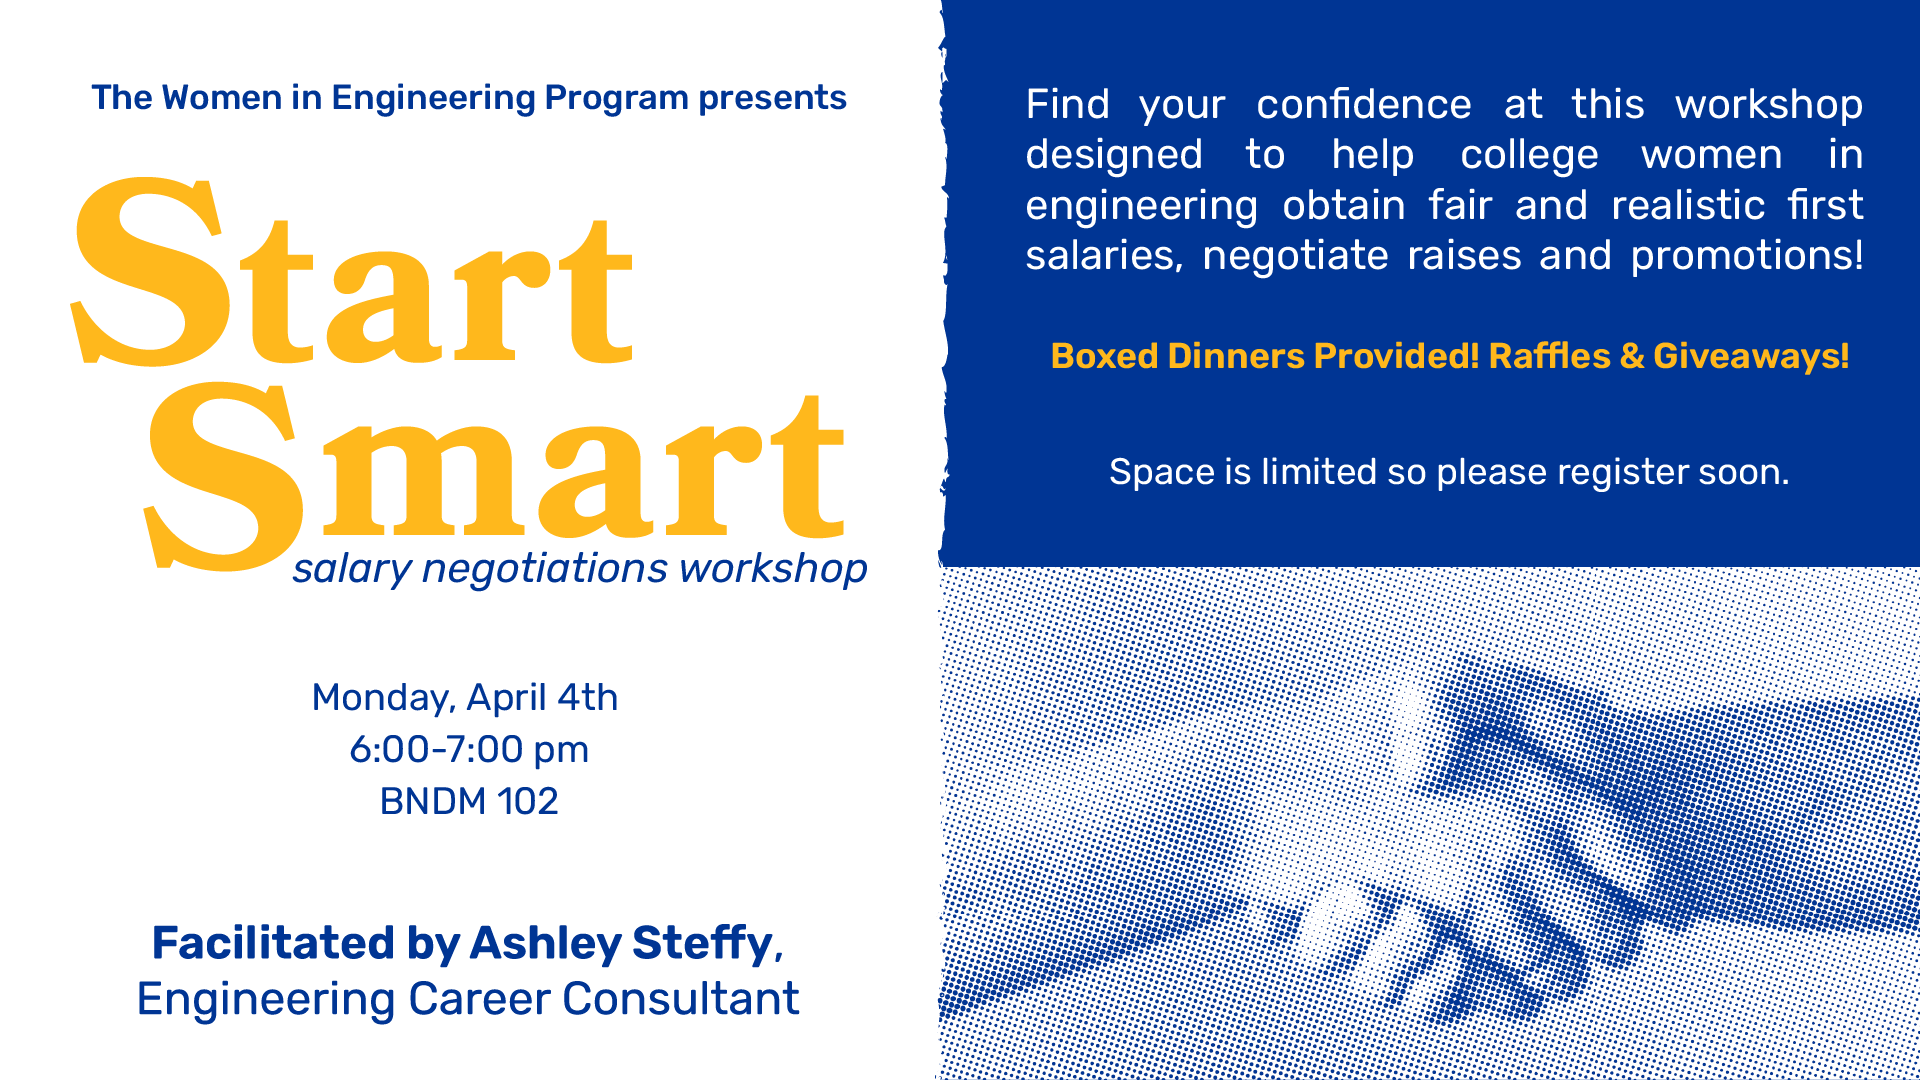 A old event flyer for Start Smart, a salary negotiations workshop for women in engineering at Pitt